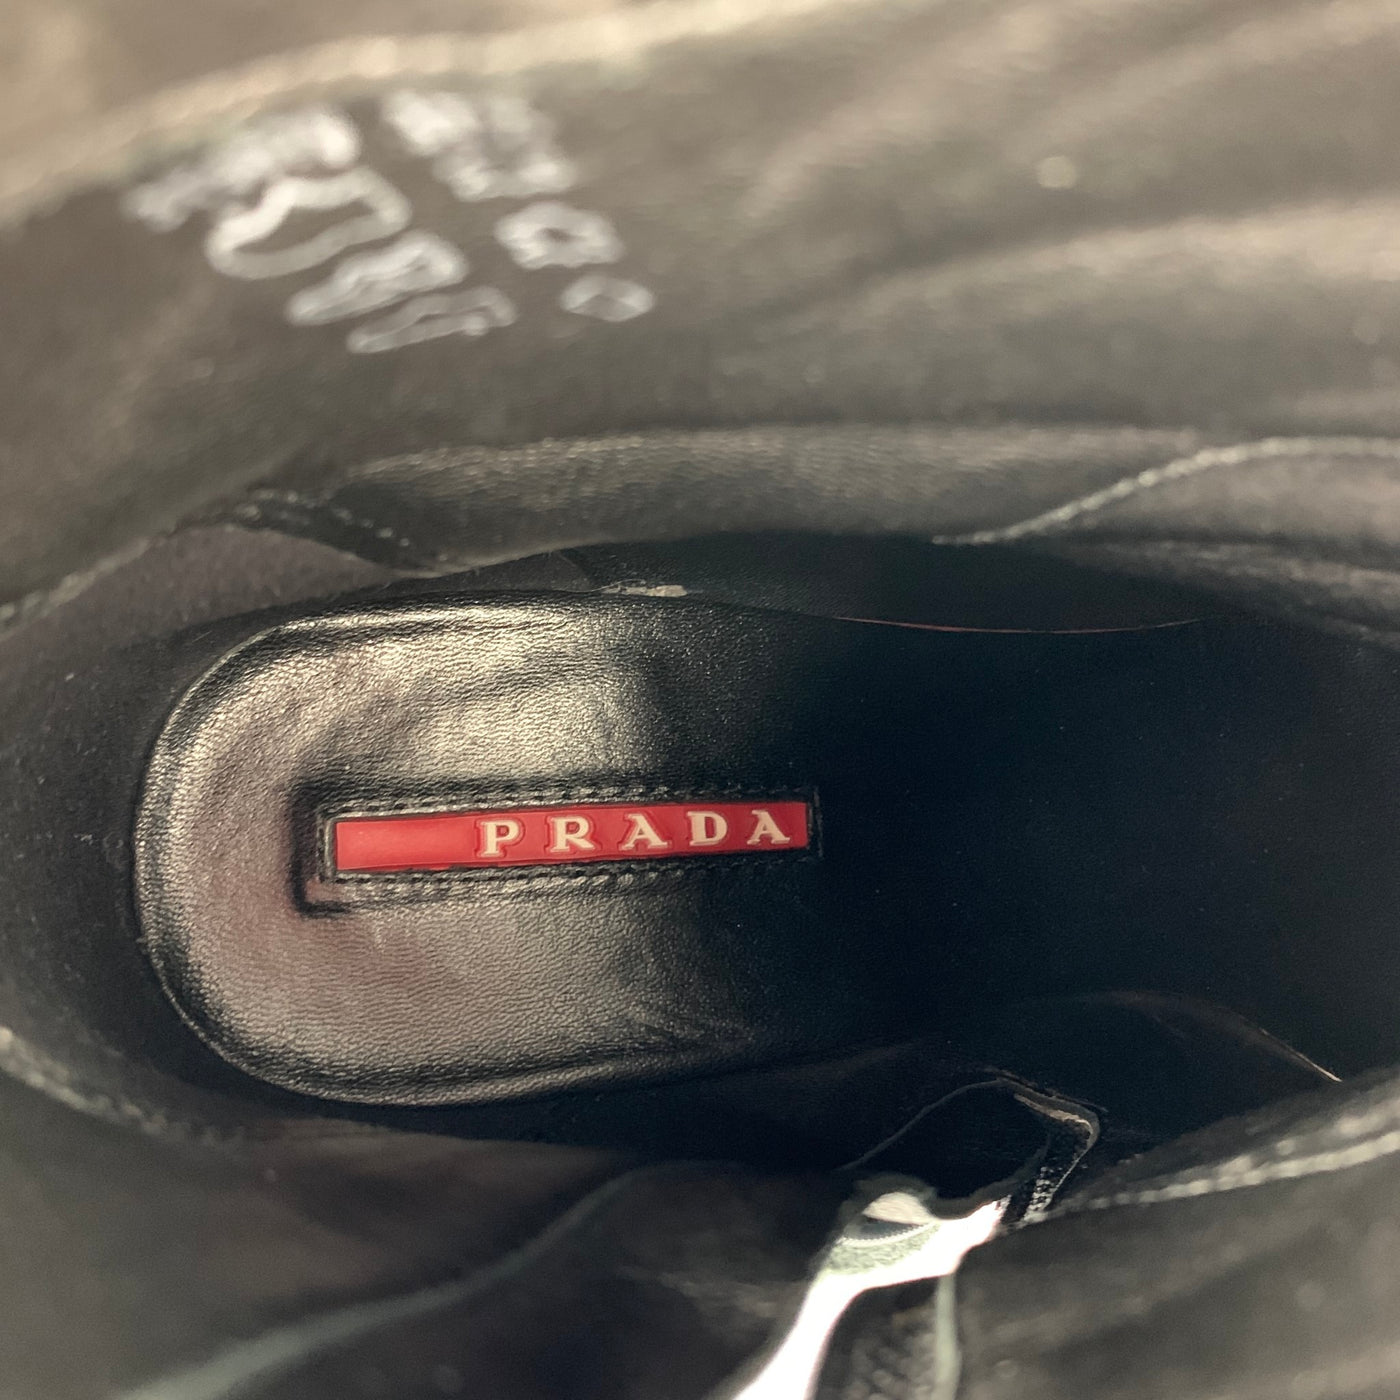 PRADA SPORT Size 7.5 Black Leather Ankle Boots